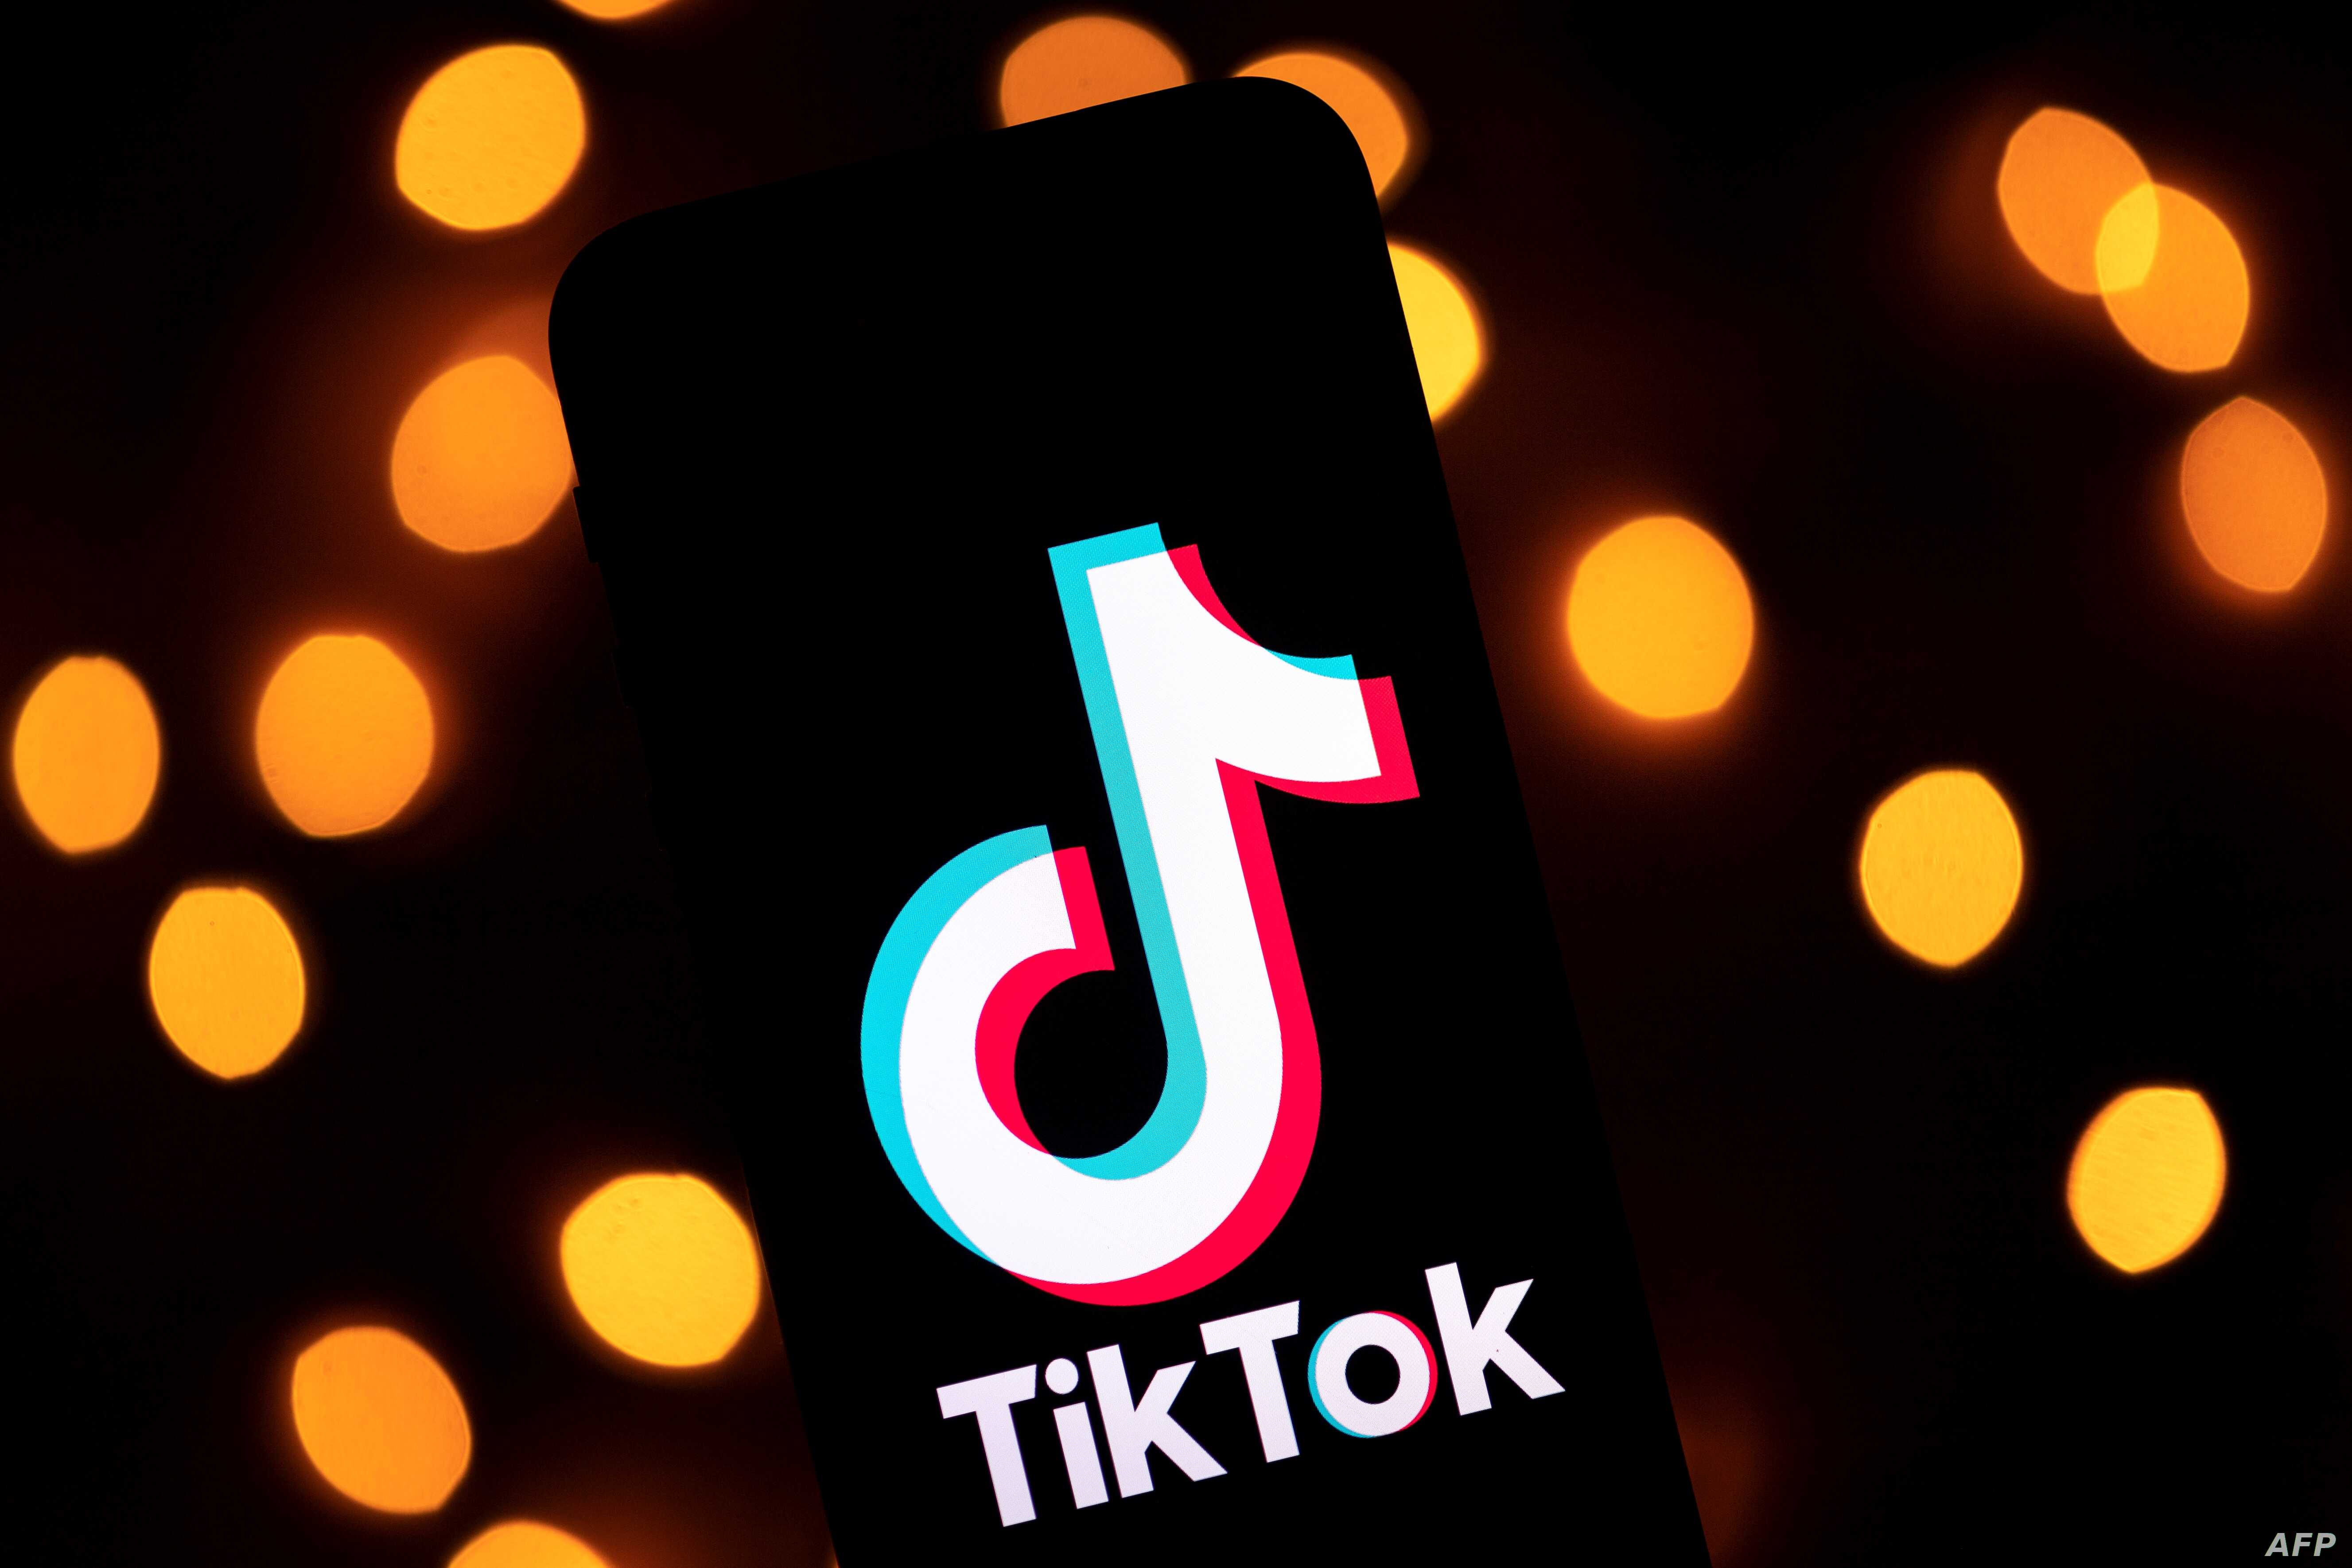 TikTok Logo - US Lawmakers Told of Security Risks From China-owned TikTok ...